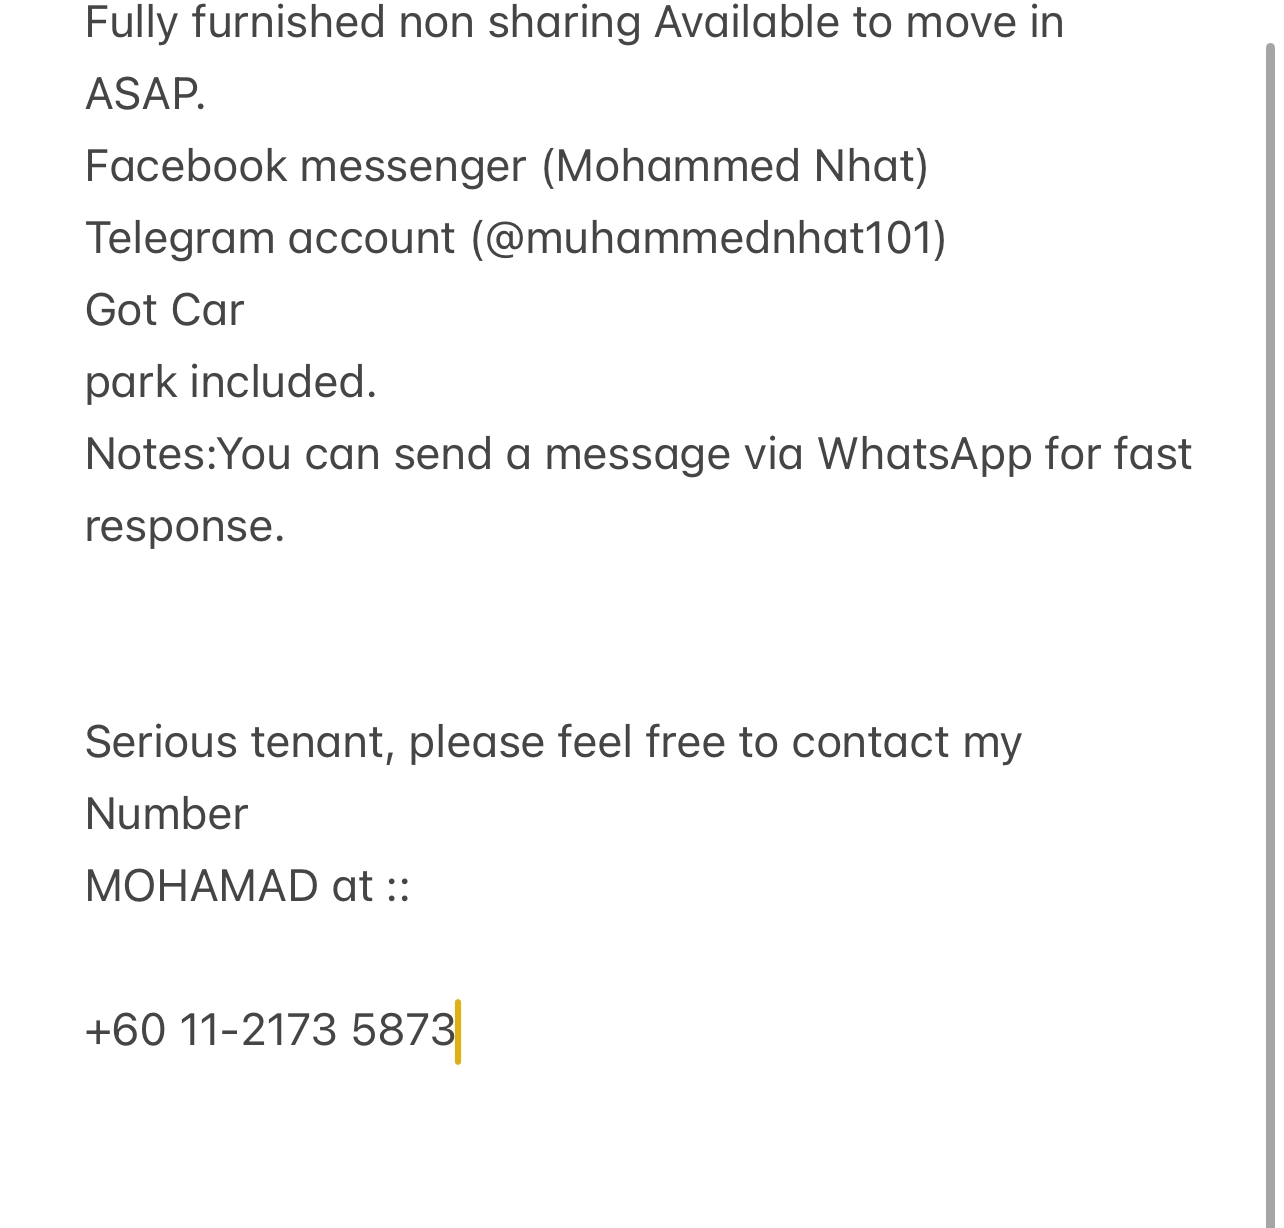 room for rent, studio, jalan 2, Send the owner a message on WhatsApp/facebook if you want to RENT the unit facebook (Mohammed Nhat)&Telegram(@muhammednhat101) Fully furnished non sharing :(comfortable)